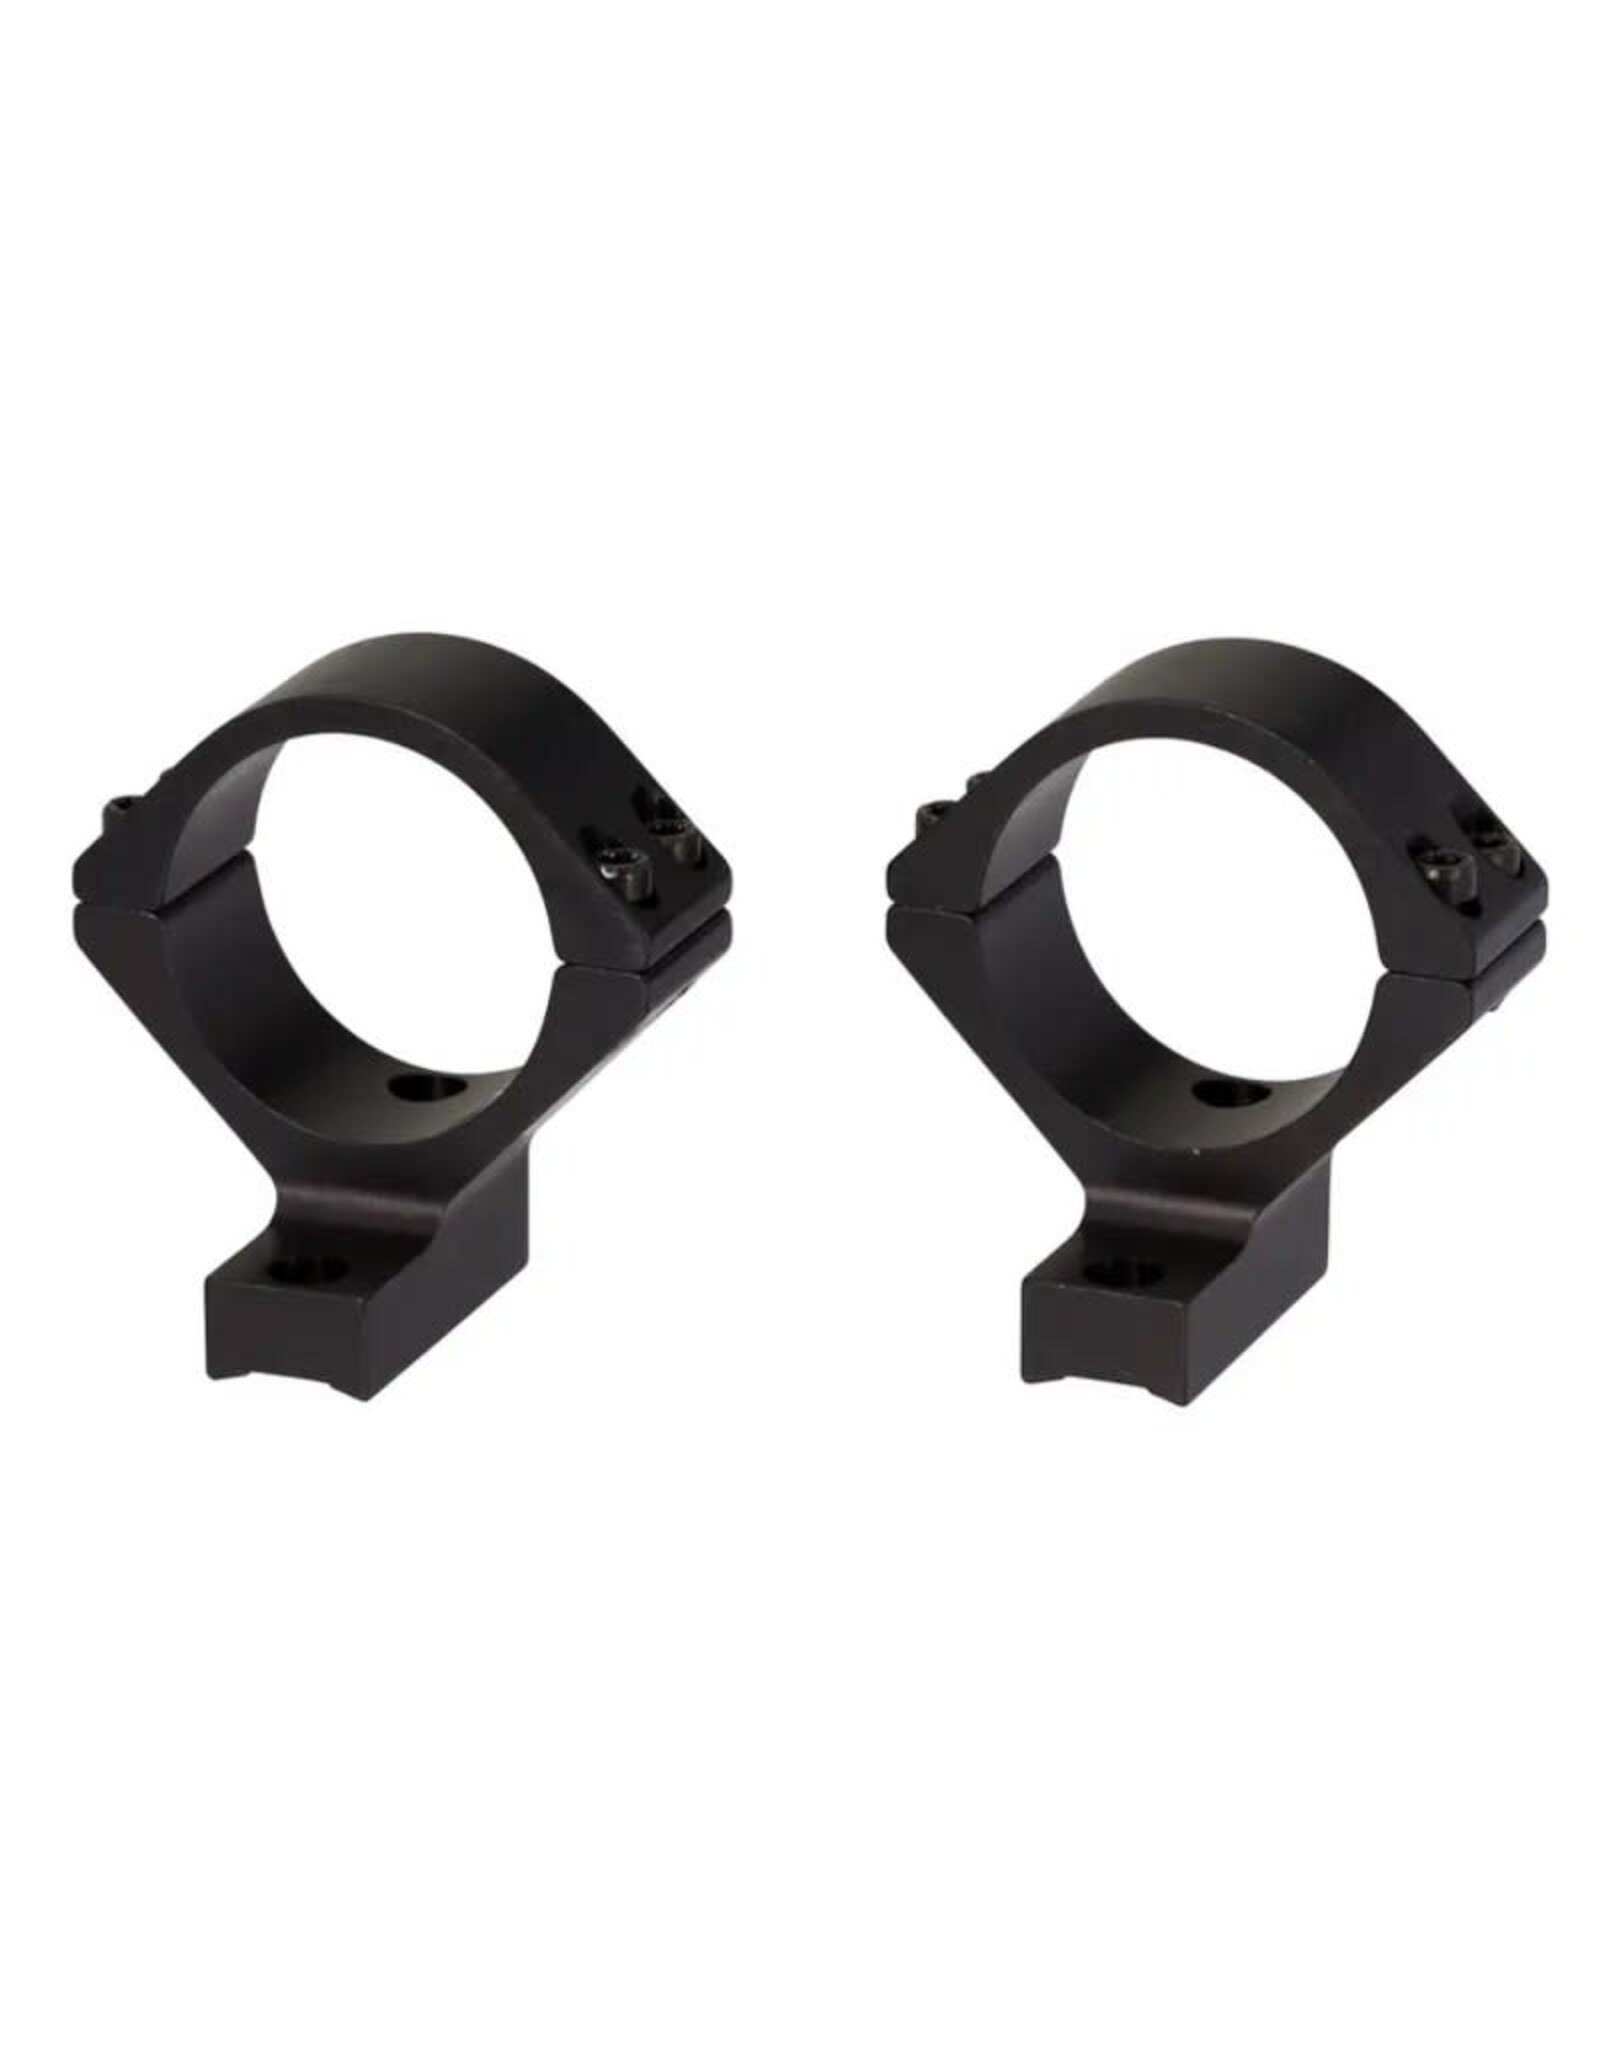 Browning AB3 integrated Scope Mount System-  1" Tube - Medium Height - Matte